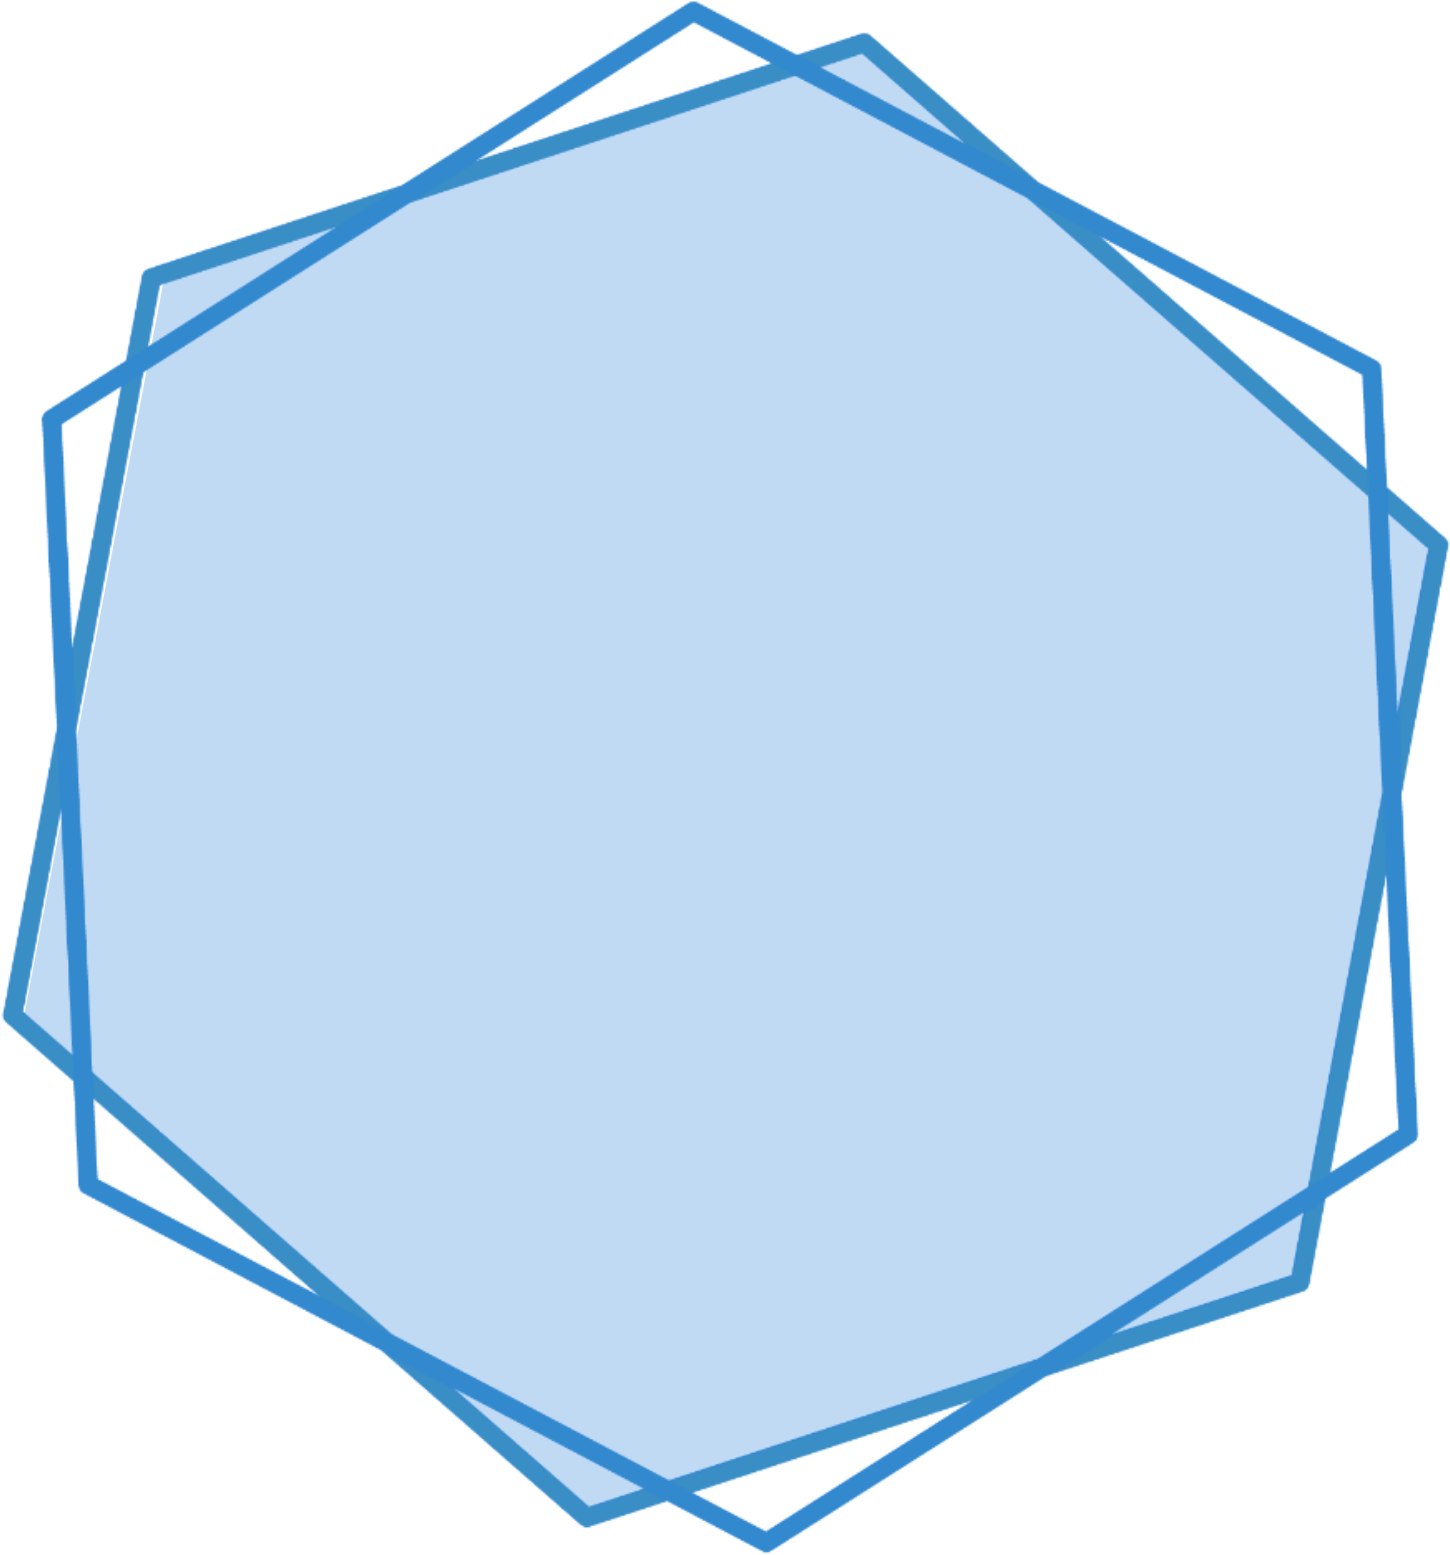 Abstract Blue Pentagon Overlay PNG image